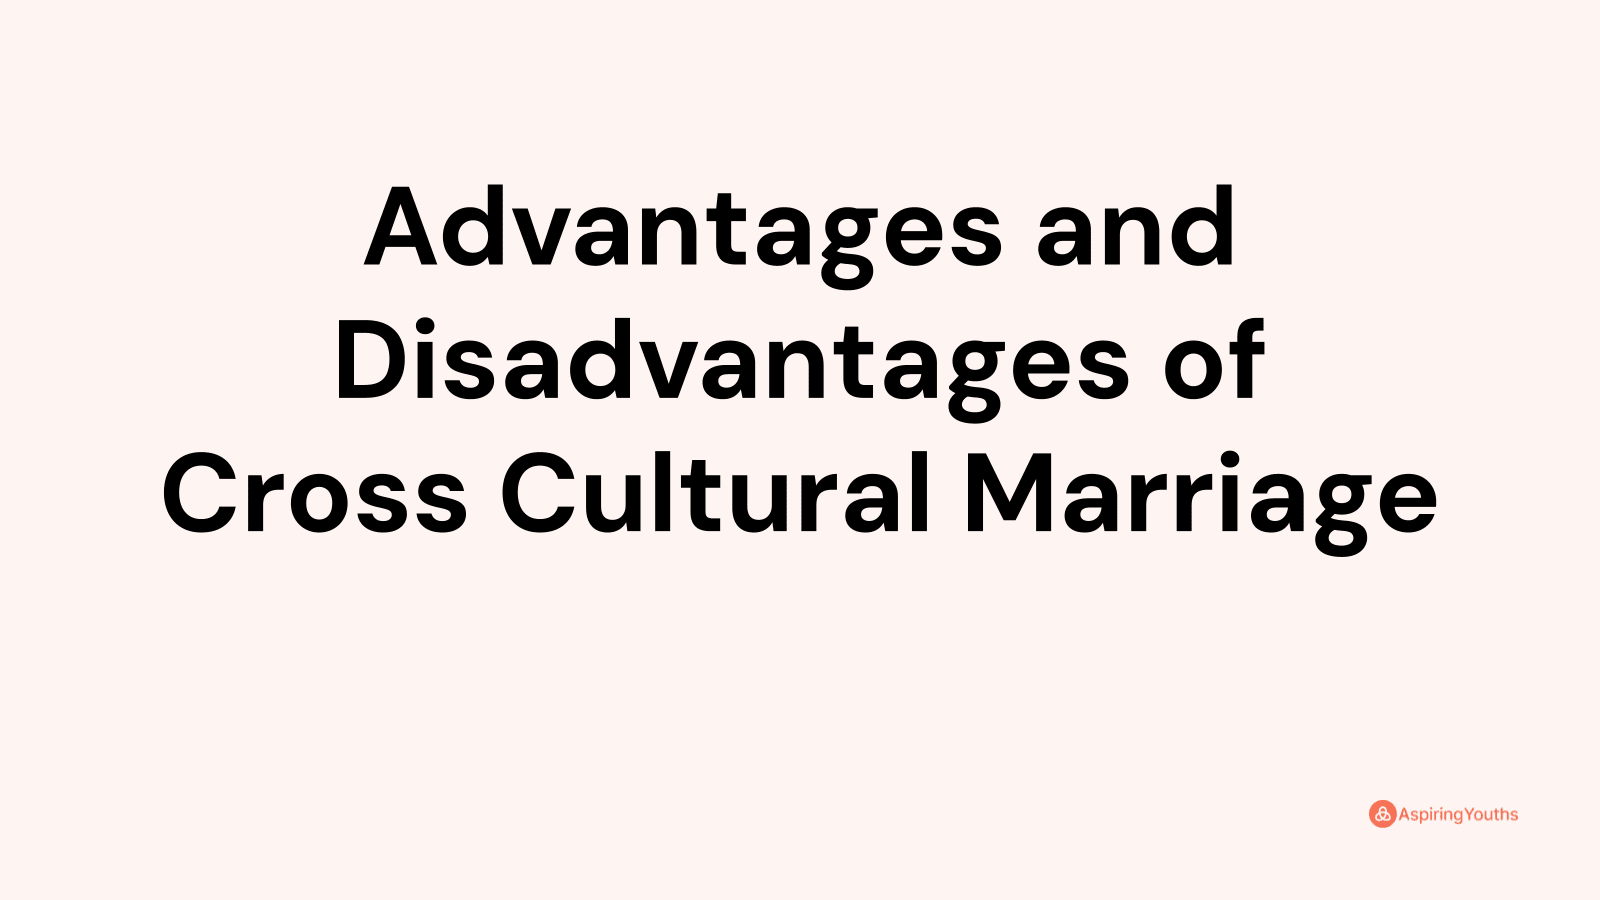 Advantages and disadvantages of Cross Cultural Marriage